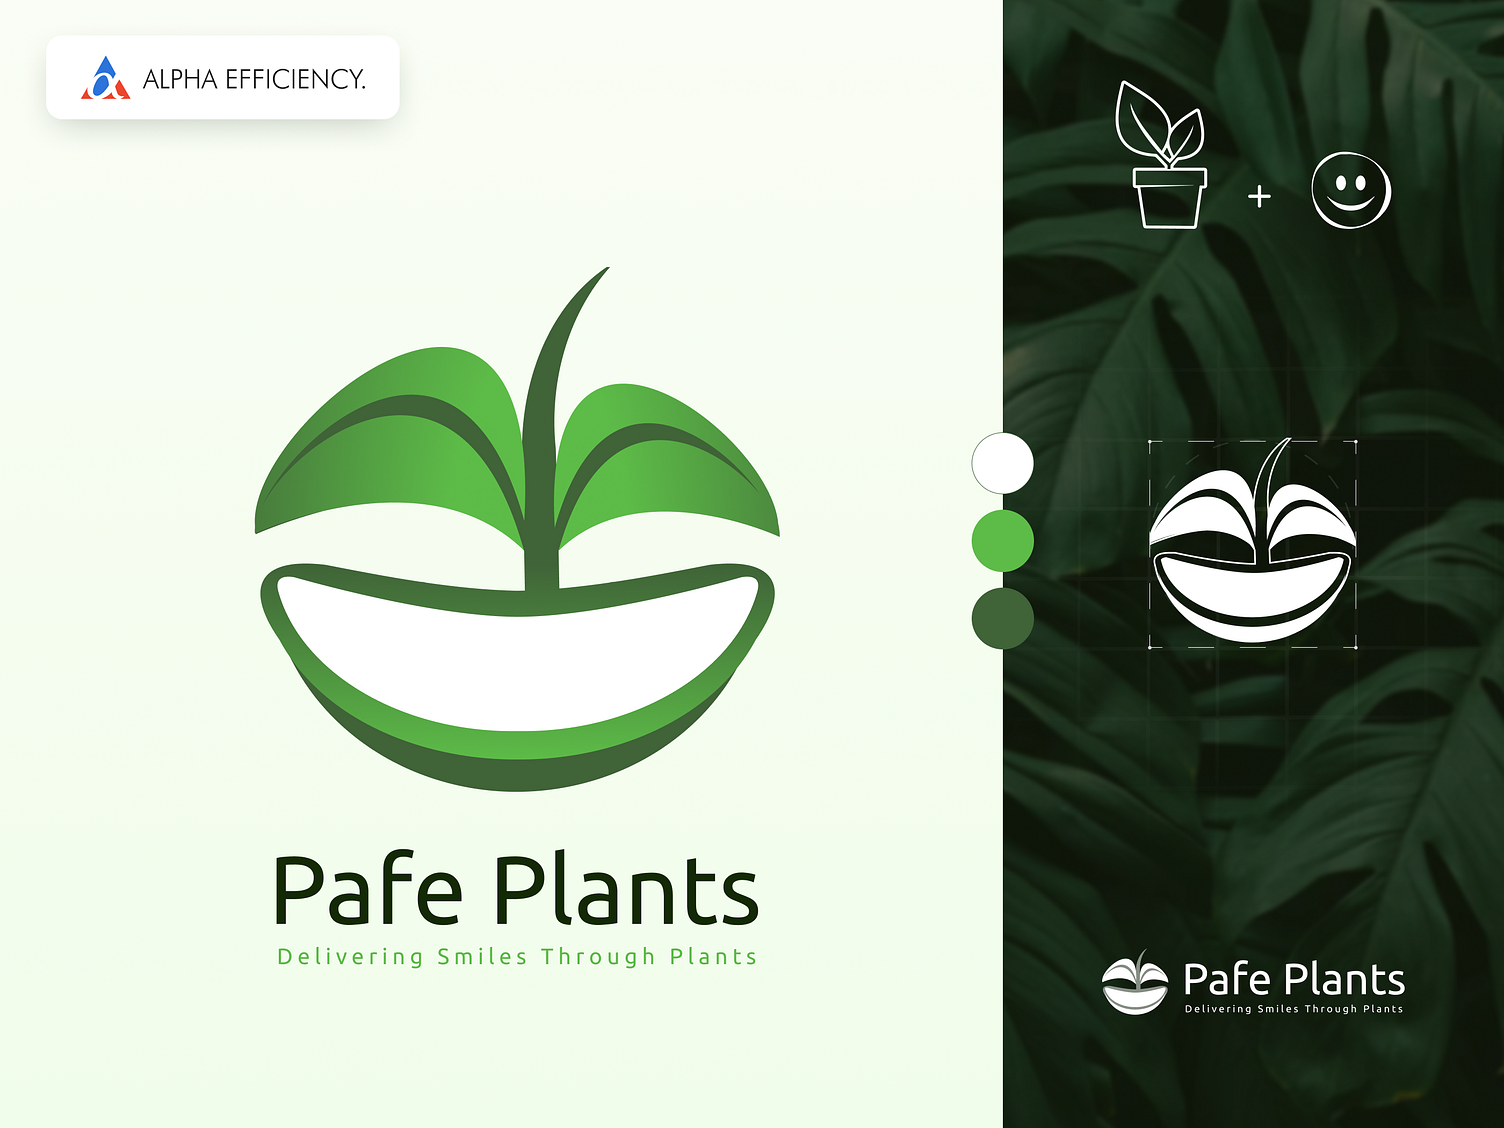 Pafe Plants Logo Design by Alpha Efficiency on Dribbble